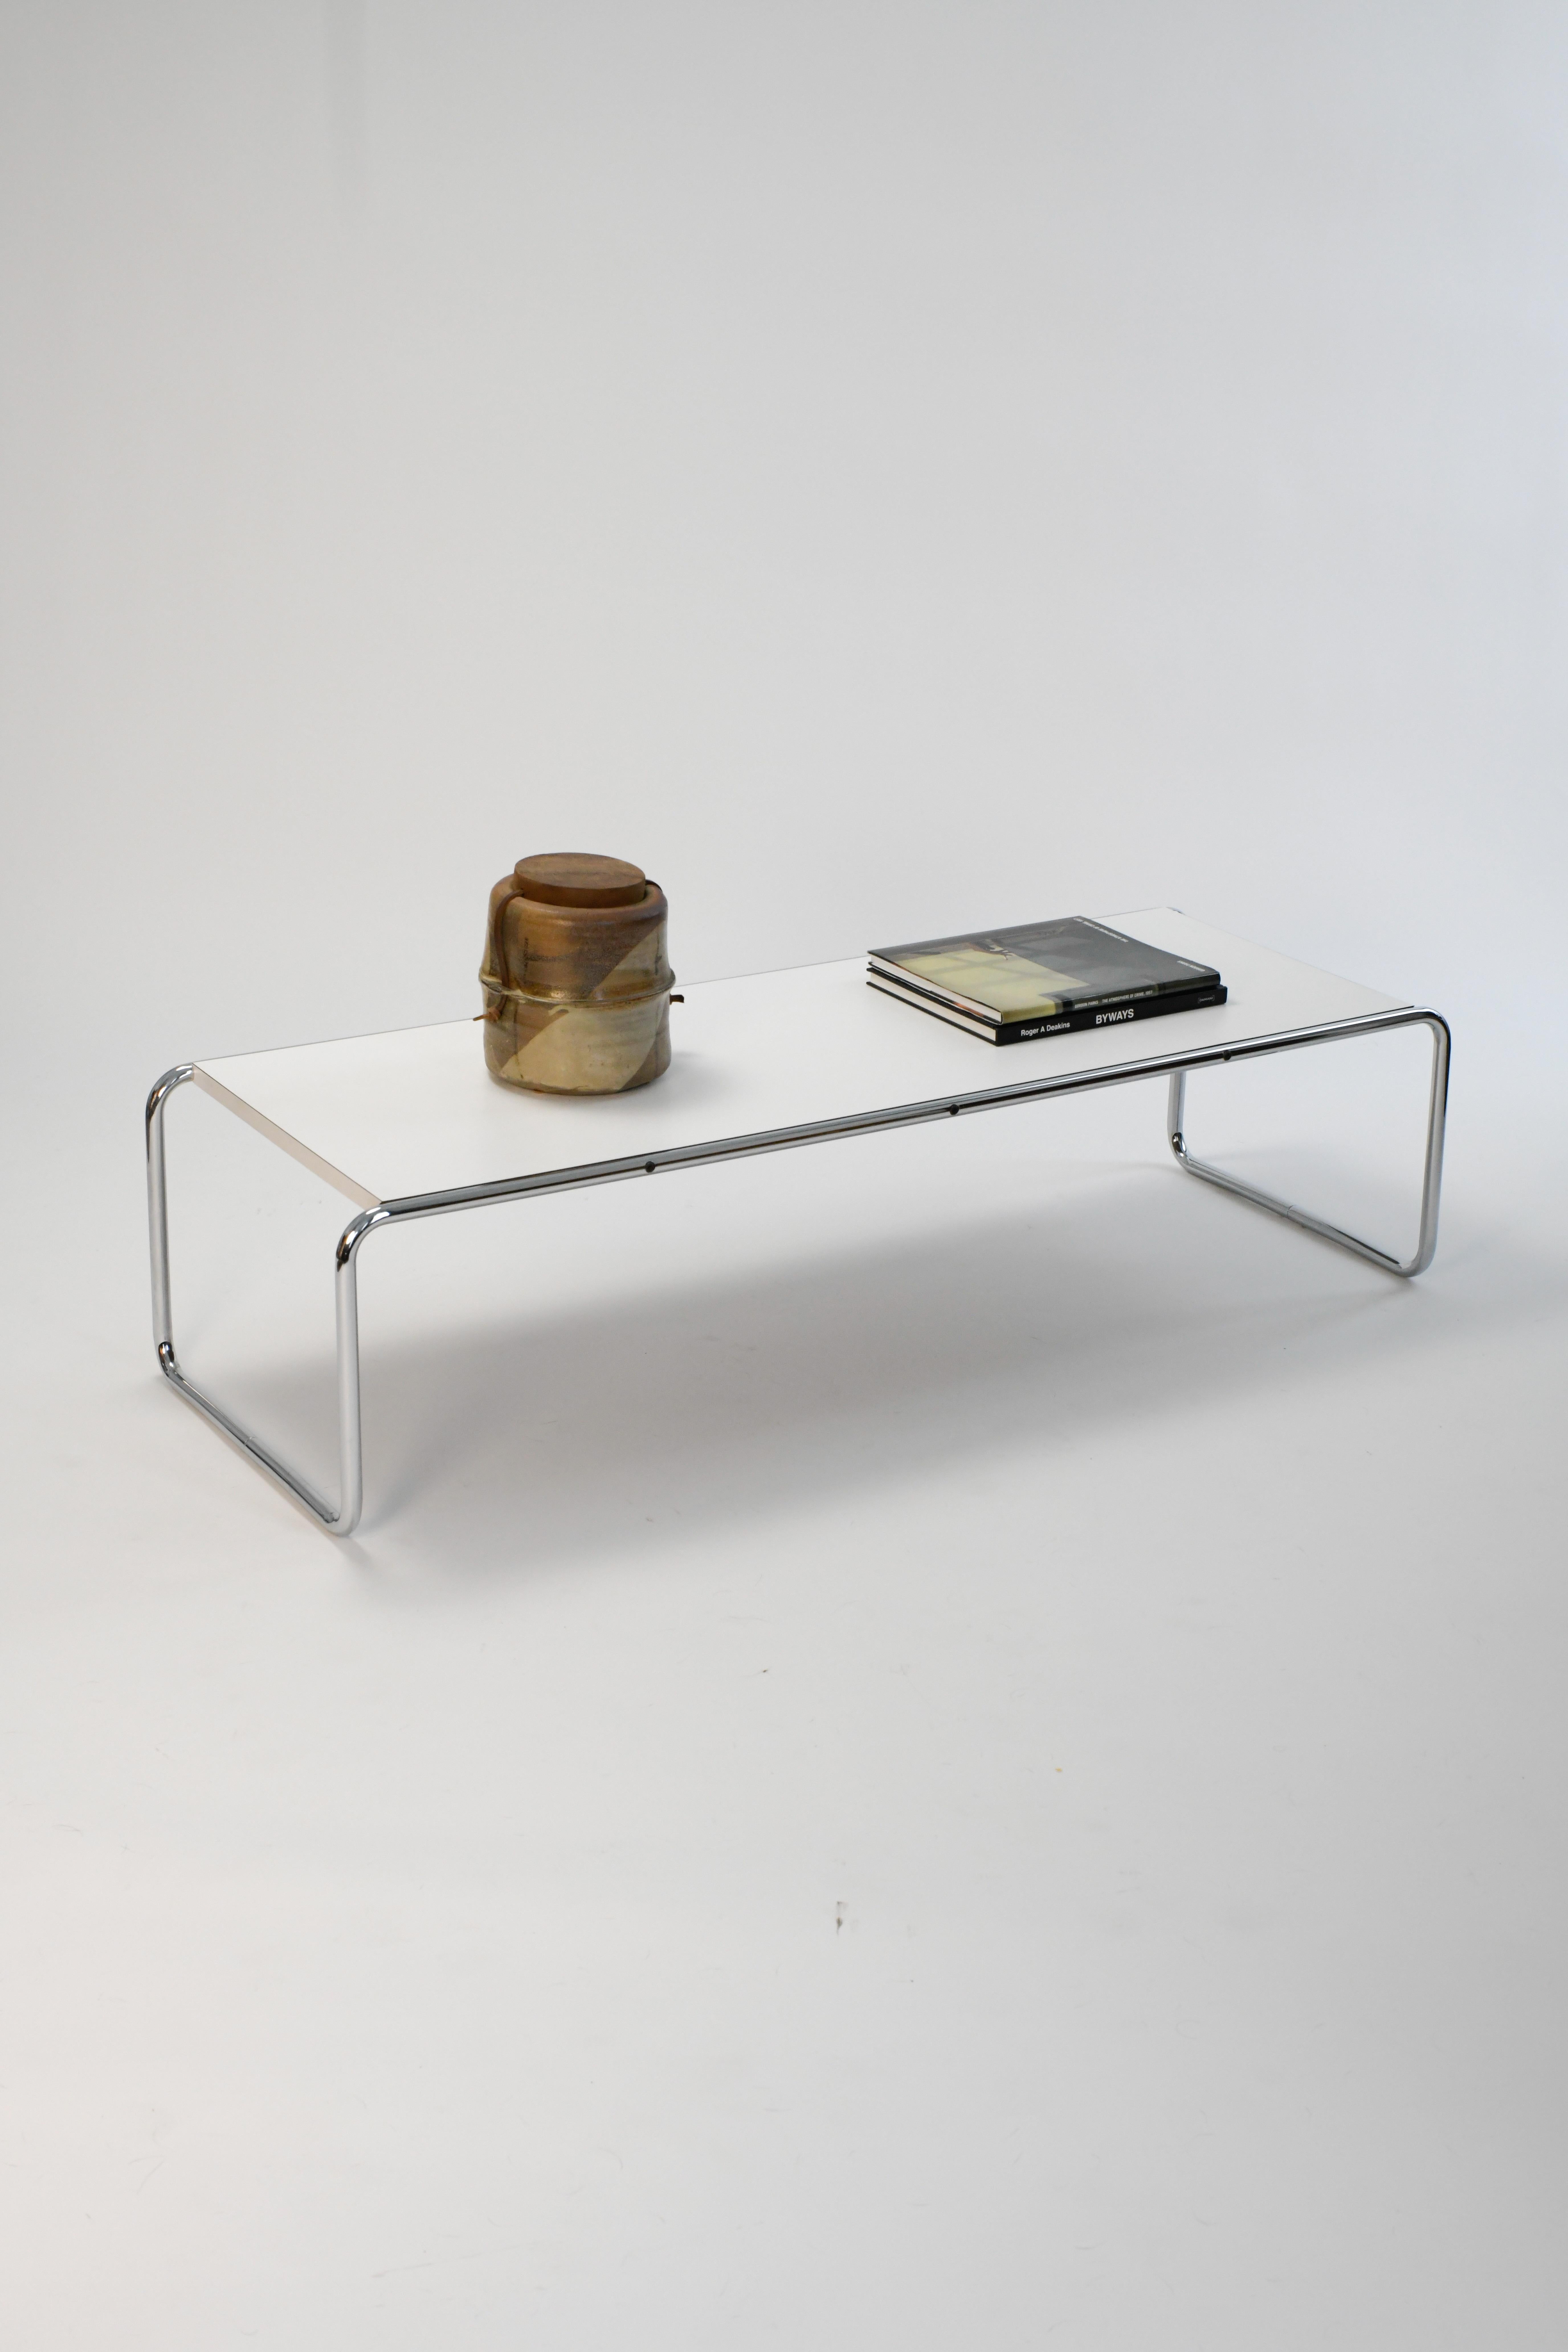 Beautiful 1980s Laccio Coffee Table by Marcel Breuer for Gavina. 

This coffee table is in good vintage condition with only some very minor pitting to the chrome base and a couple small scratches to the table top. Overall presents well and is ready